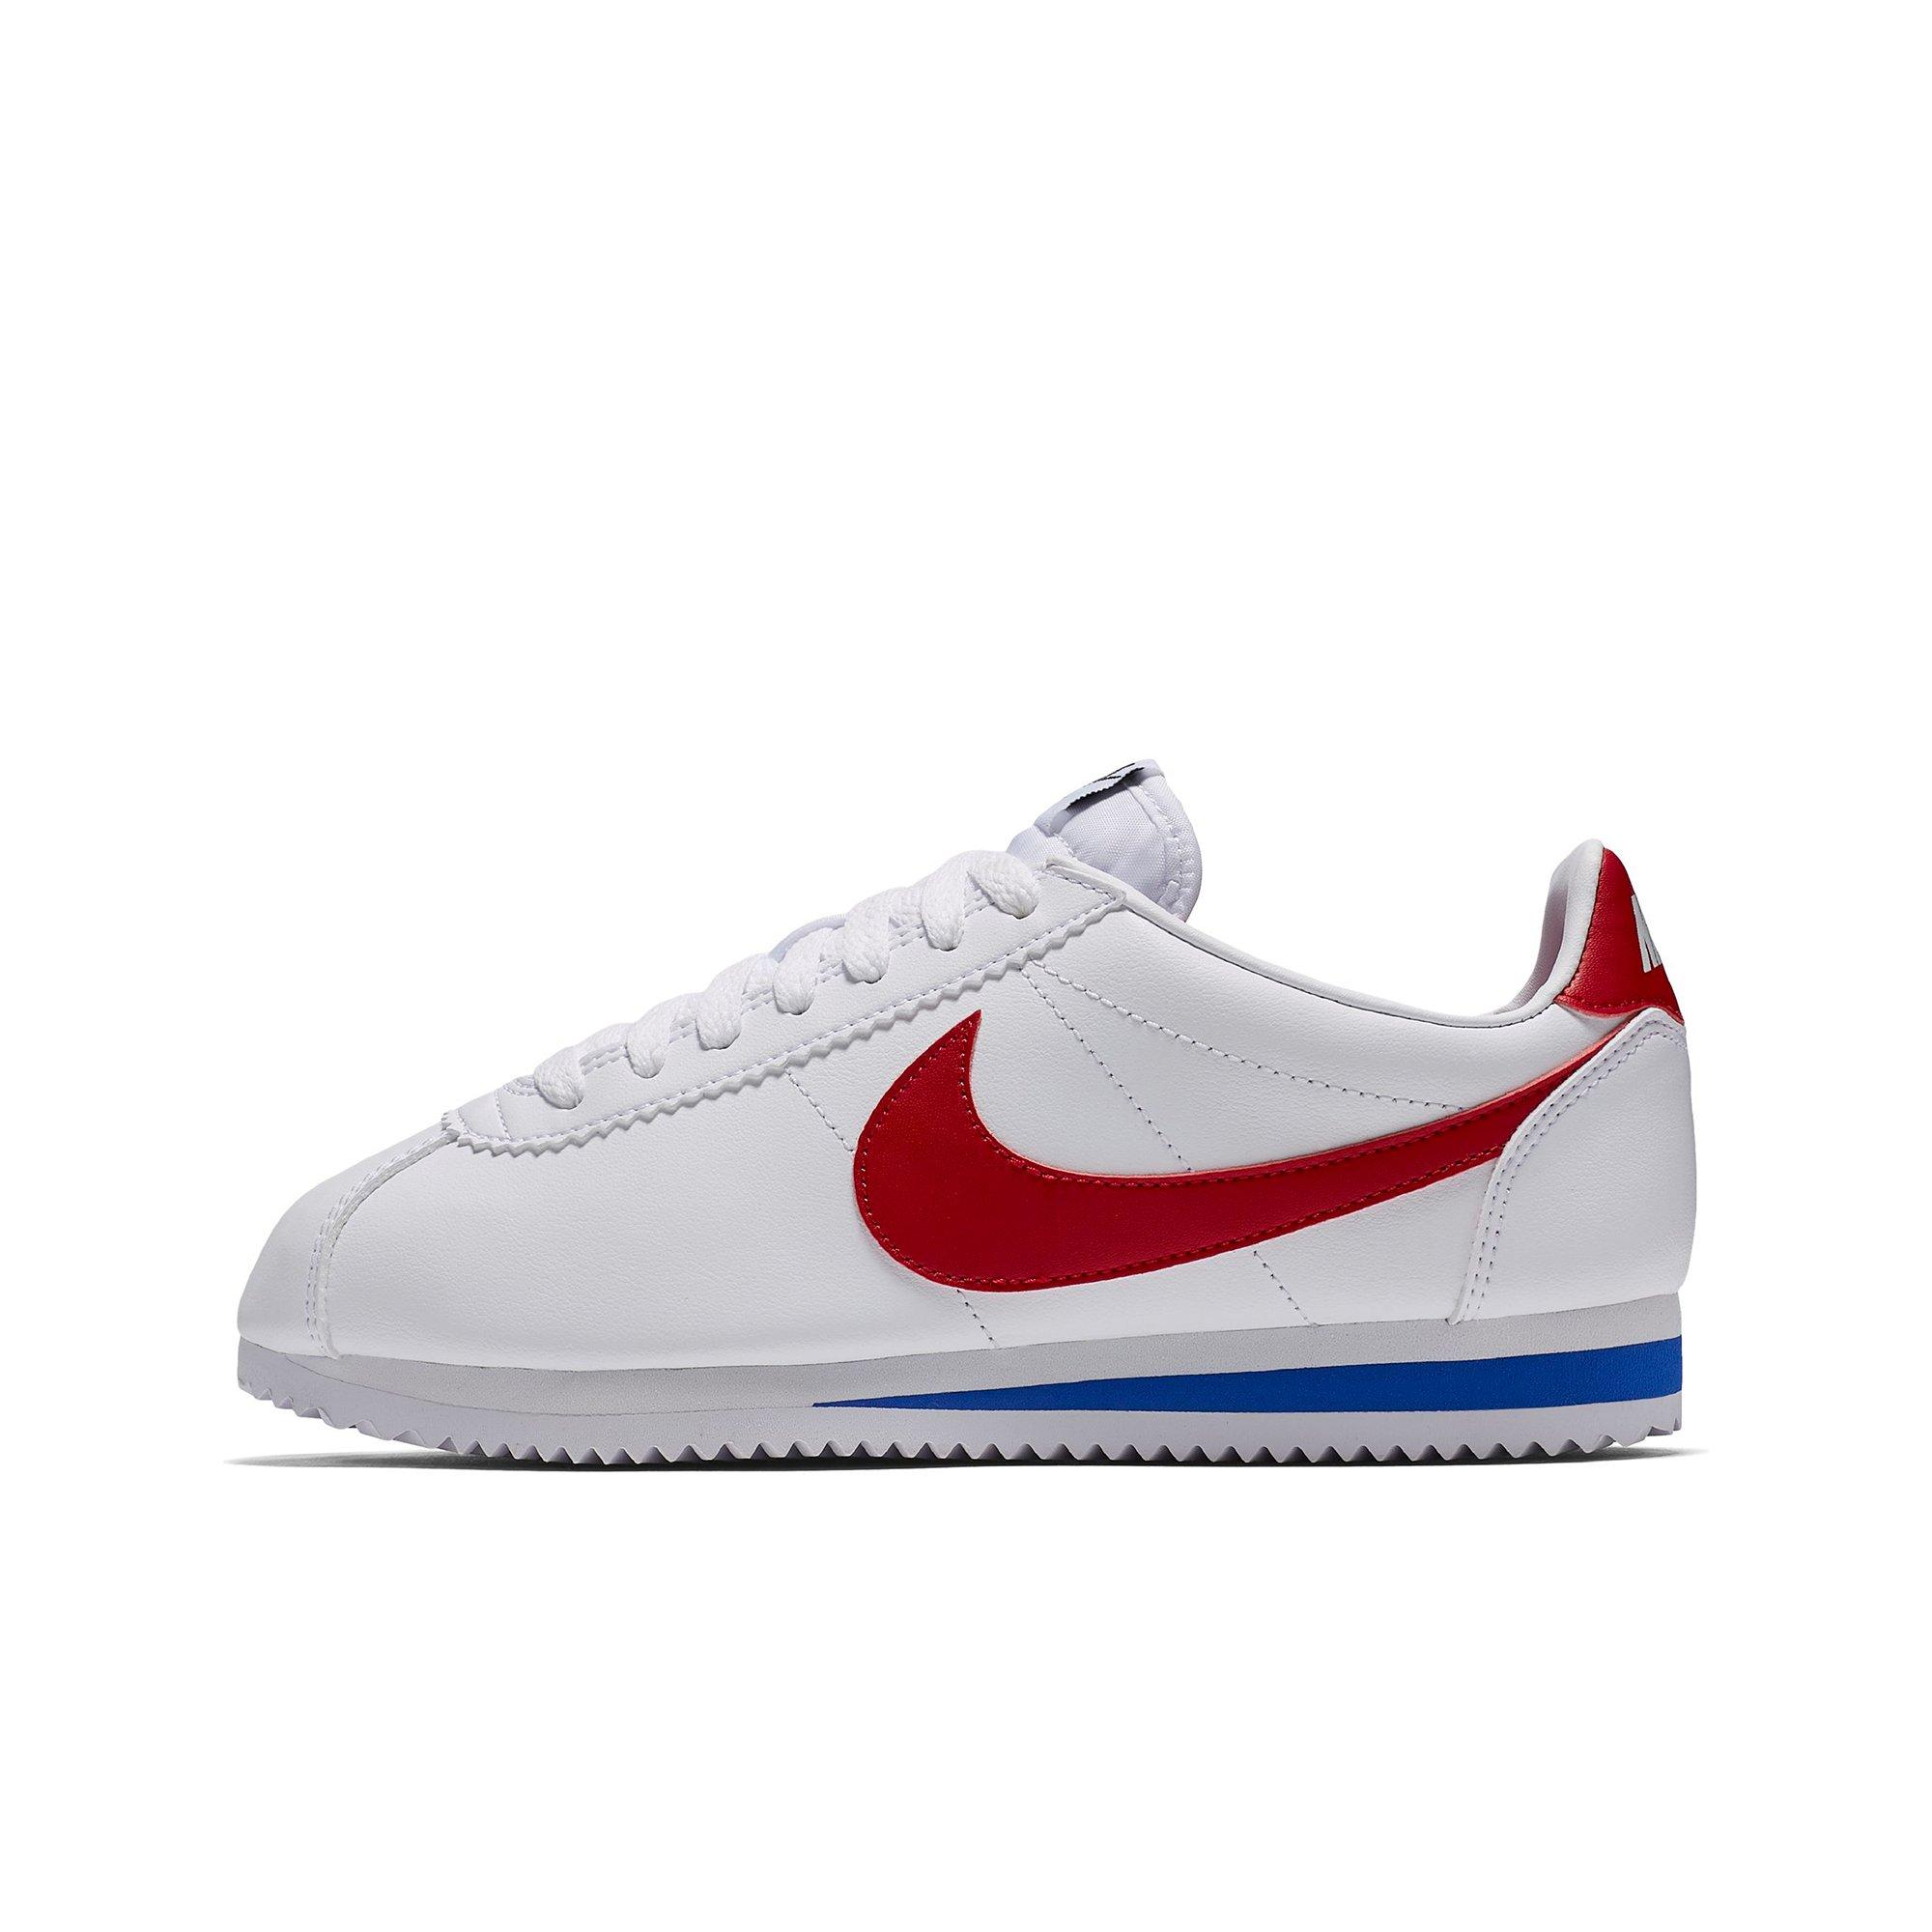 red and blue nike cortez womens